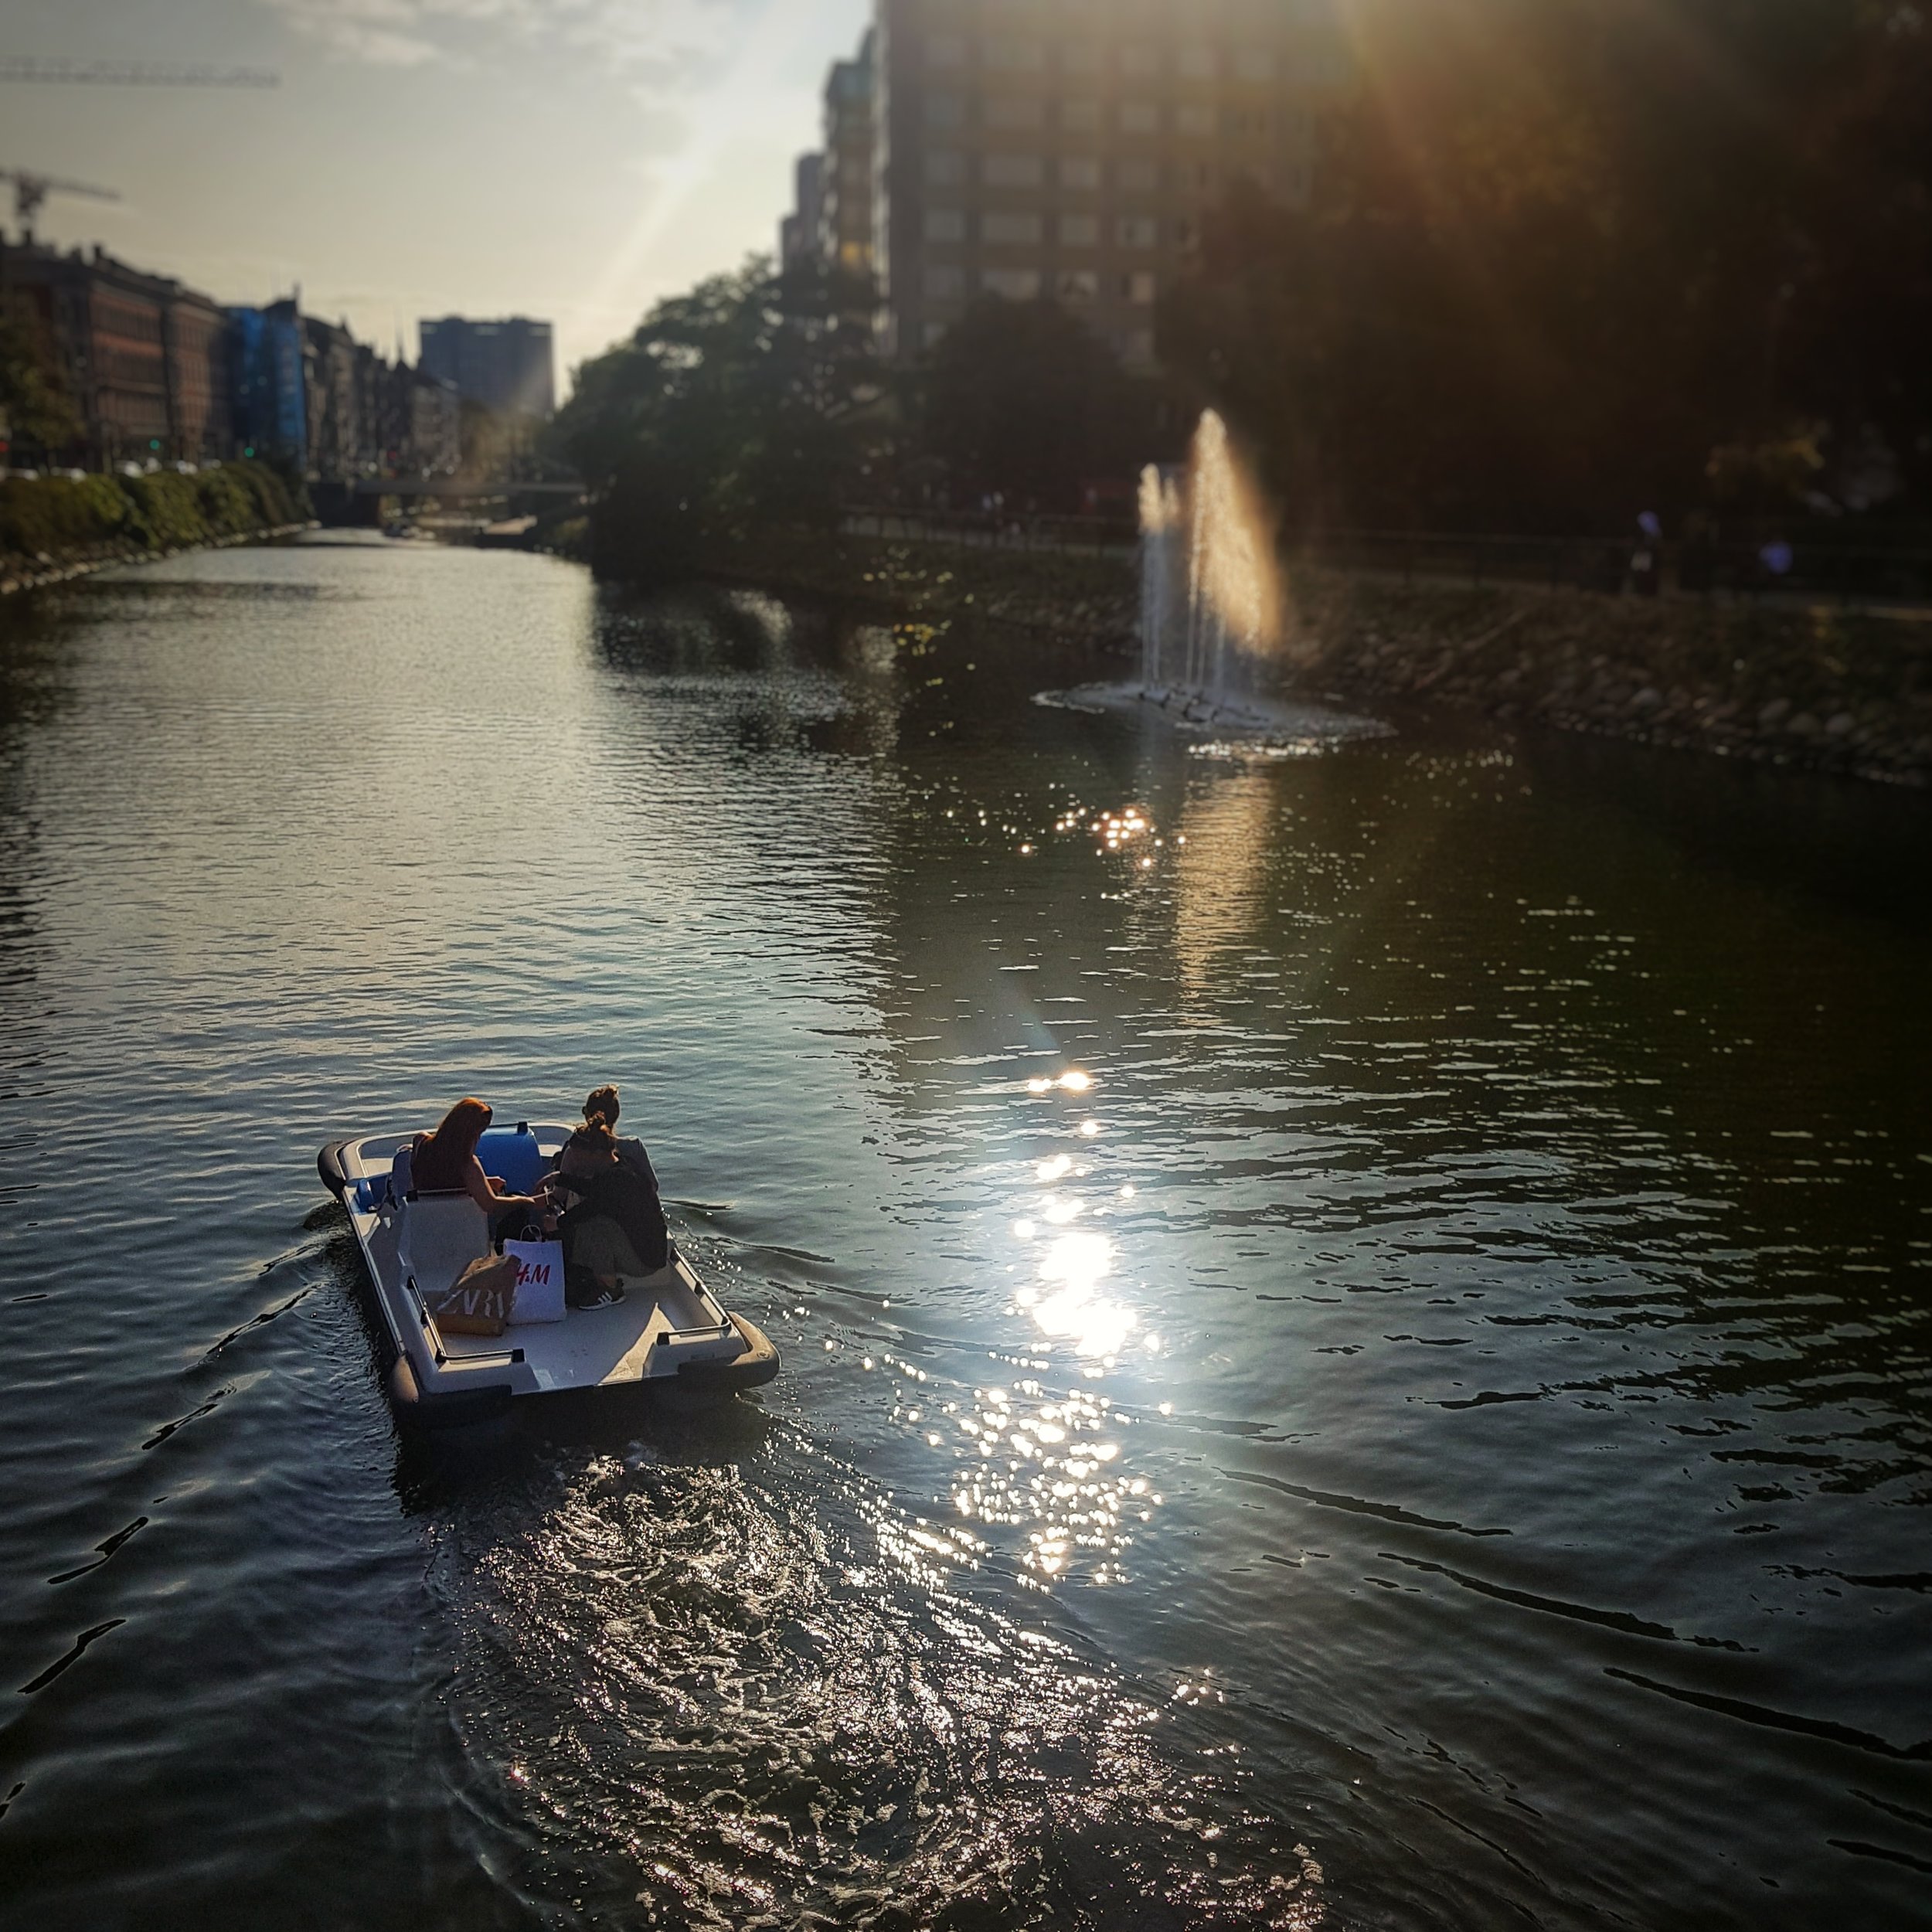 Day 219 - August 7: Canal Ride